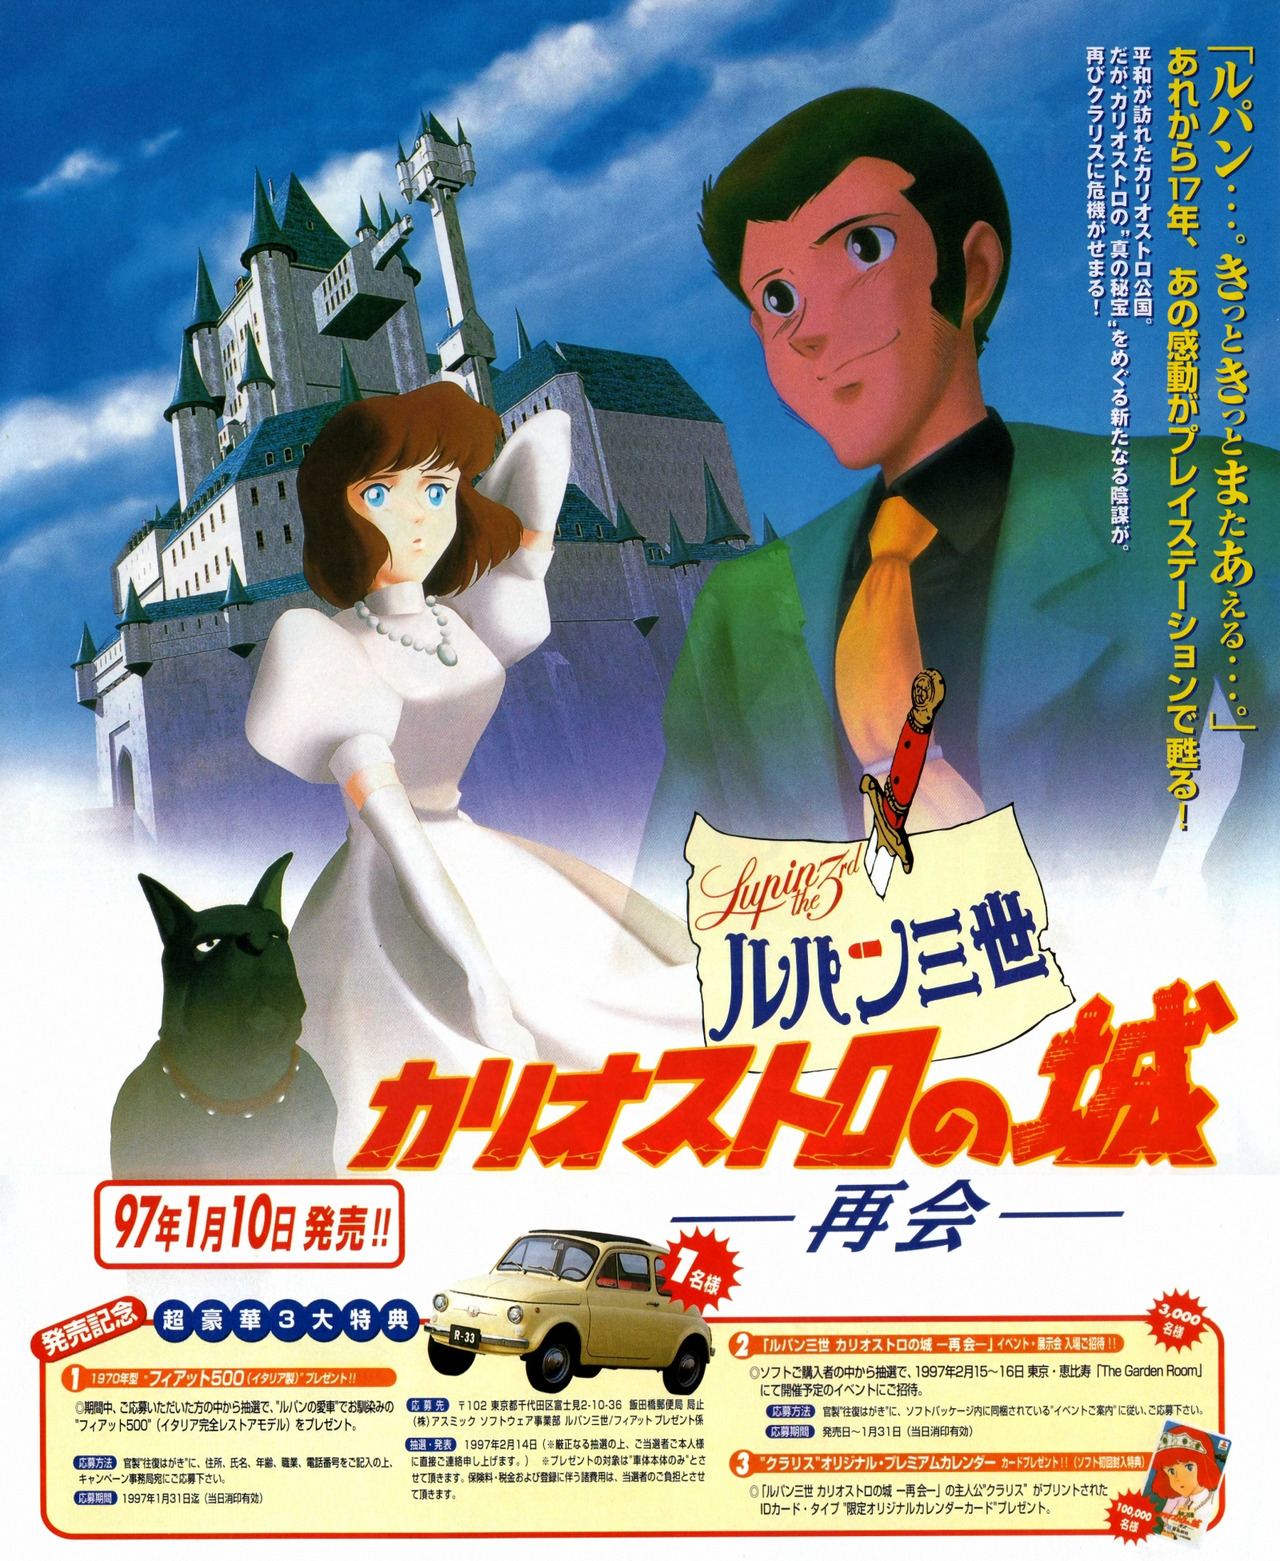 animarchive:  Newtype (02/1997) - Lupin III: The Castle of Cagliostro video game